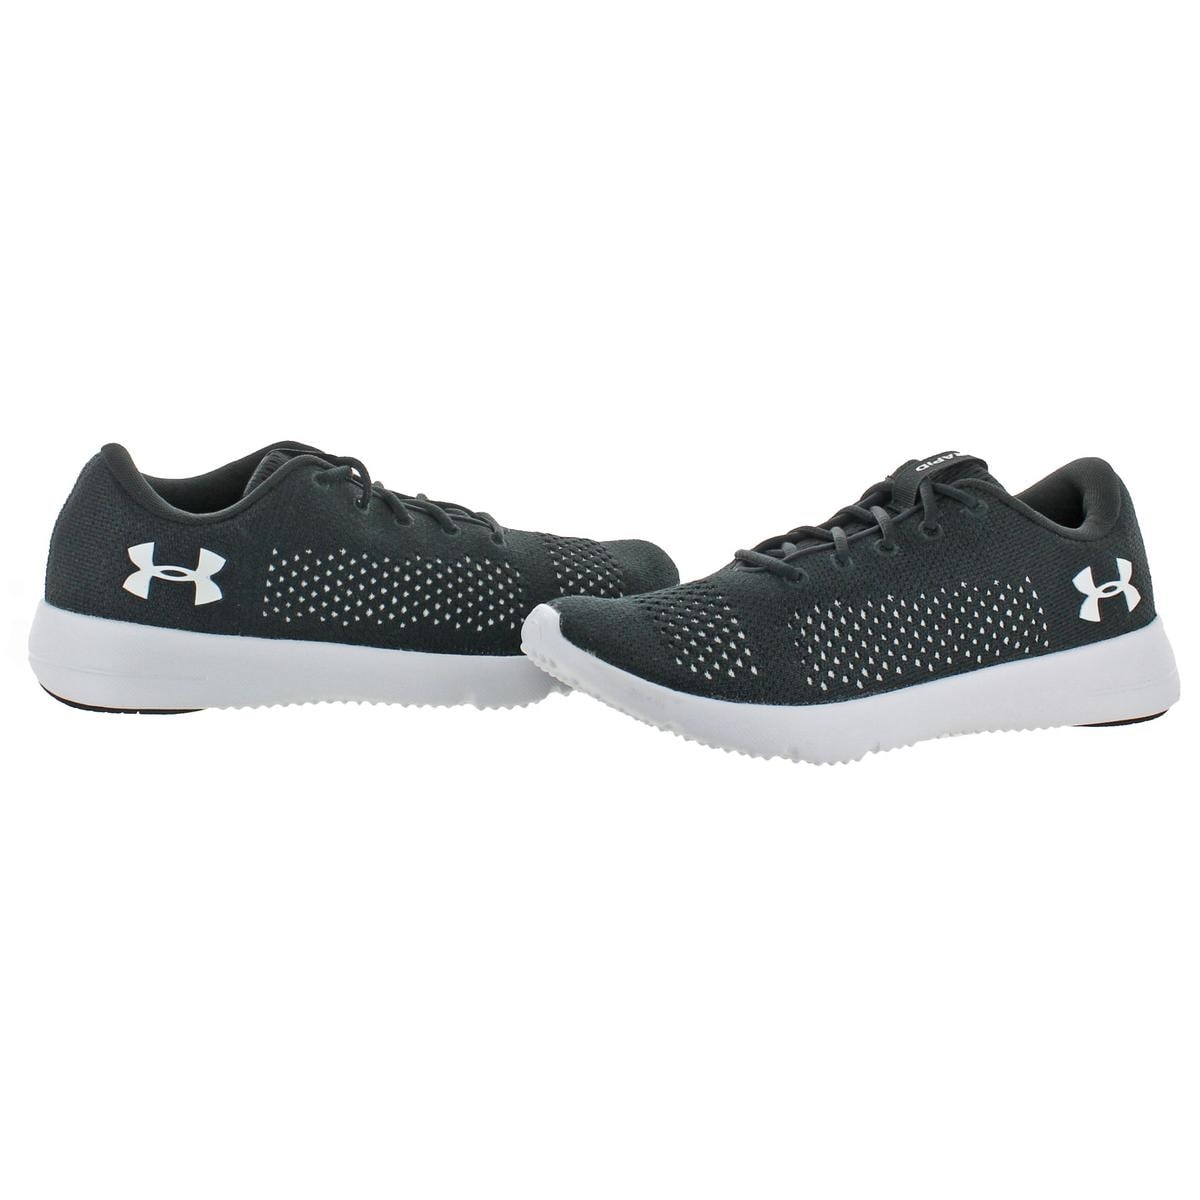 under armour rapid running shoes ladies